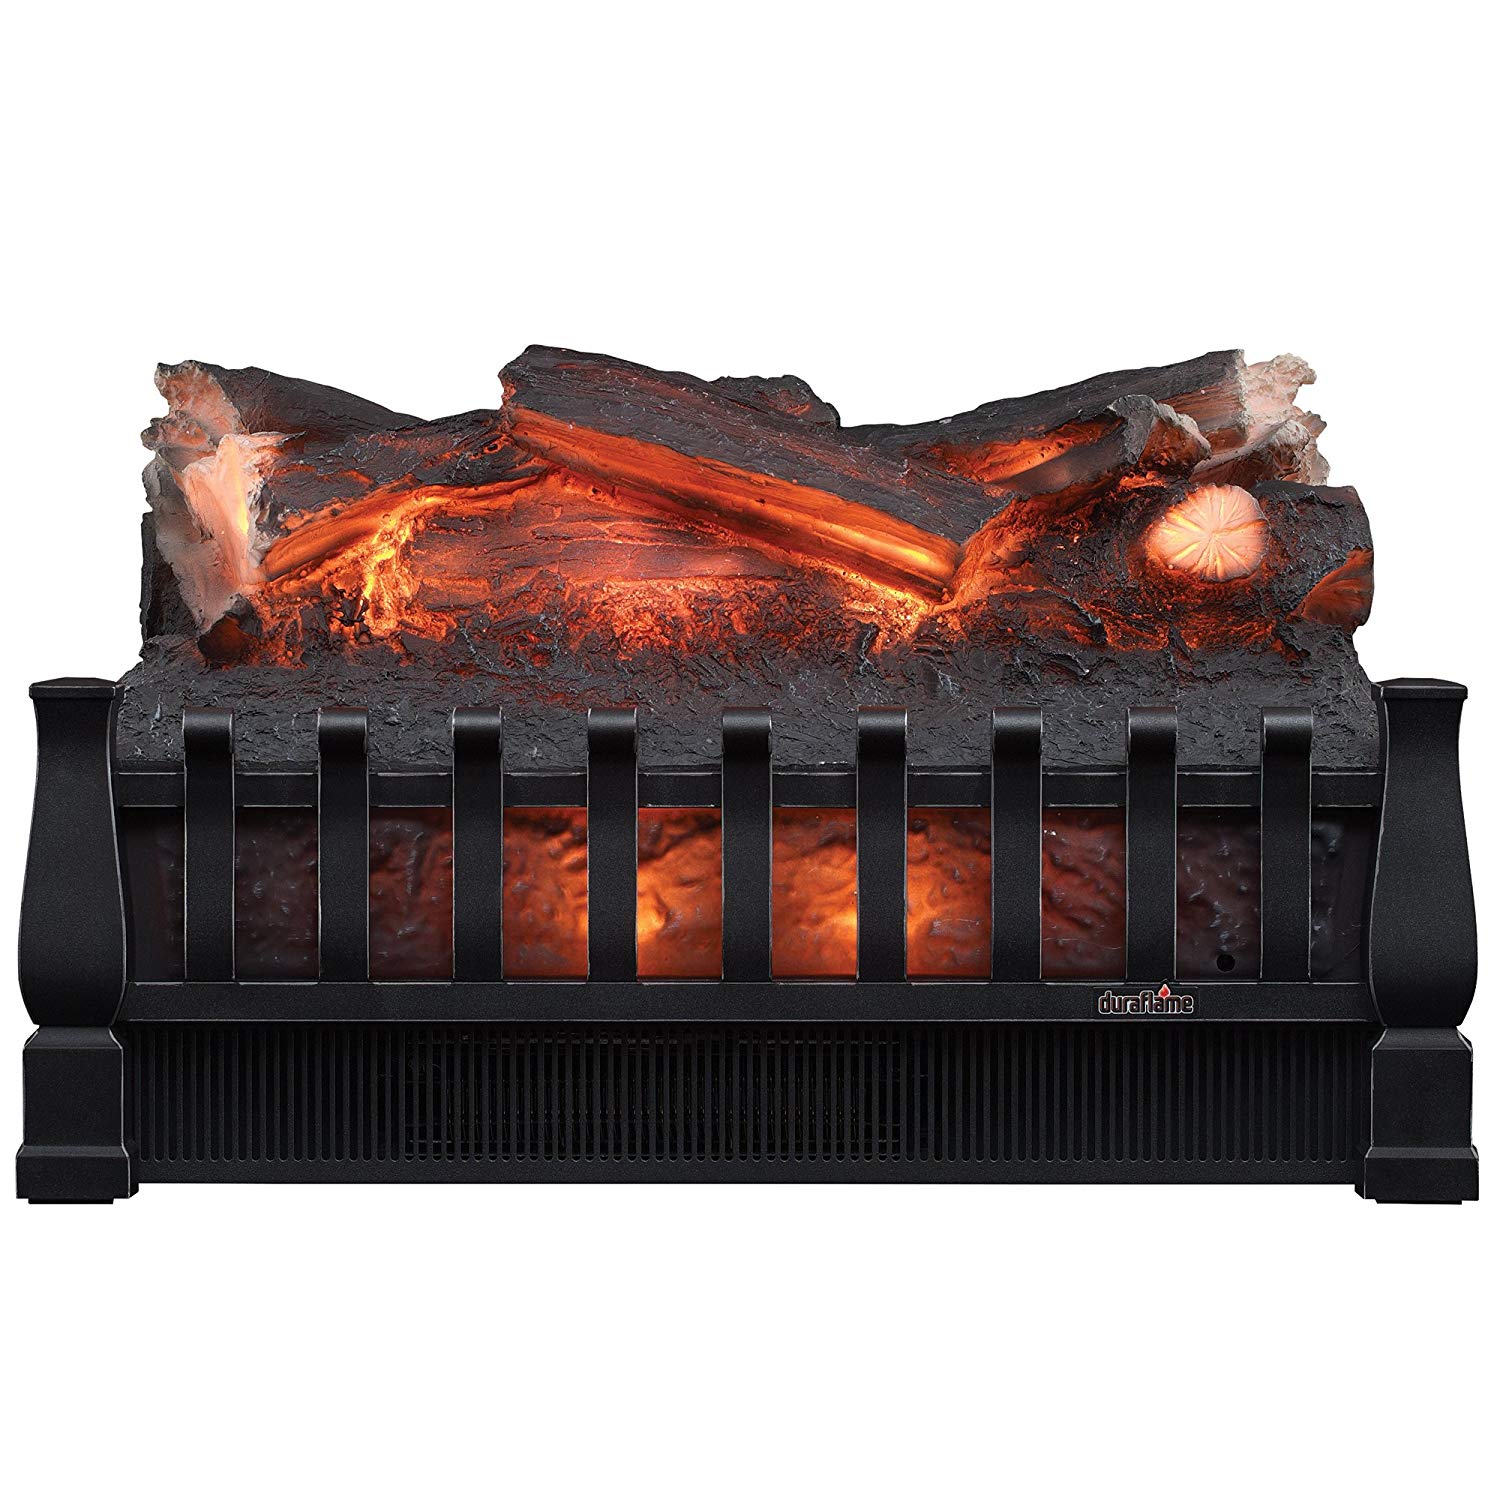 Duraflame Fireplace Insert Awesome Duraflame Dfi021aru Electric Log Set Heater with Realistic Ember Bed Black